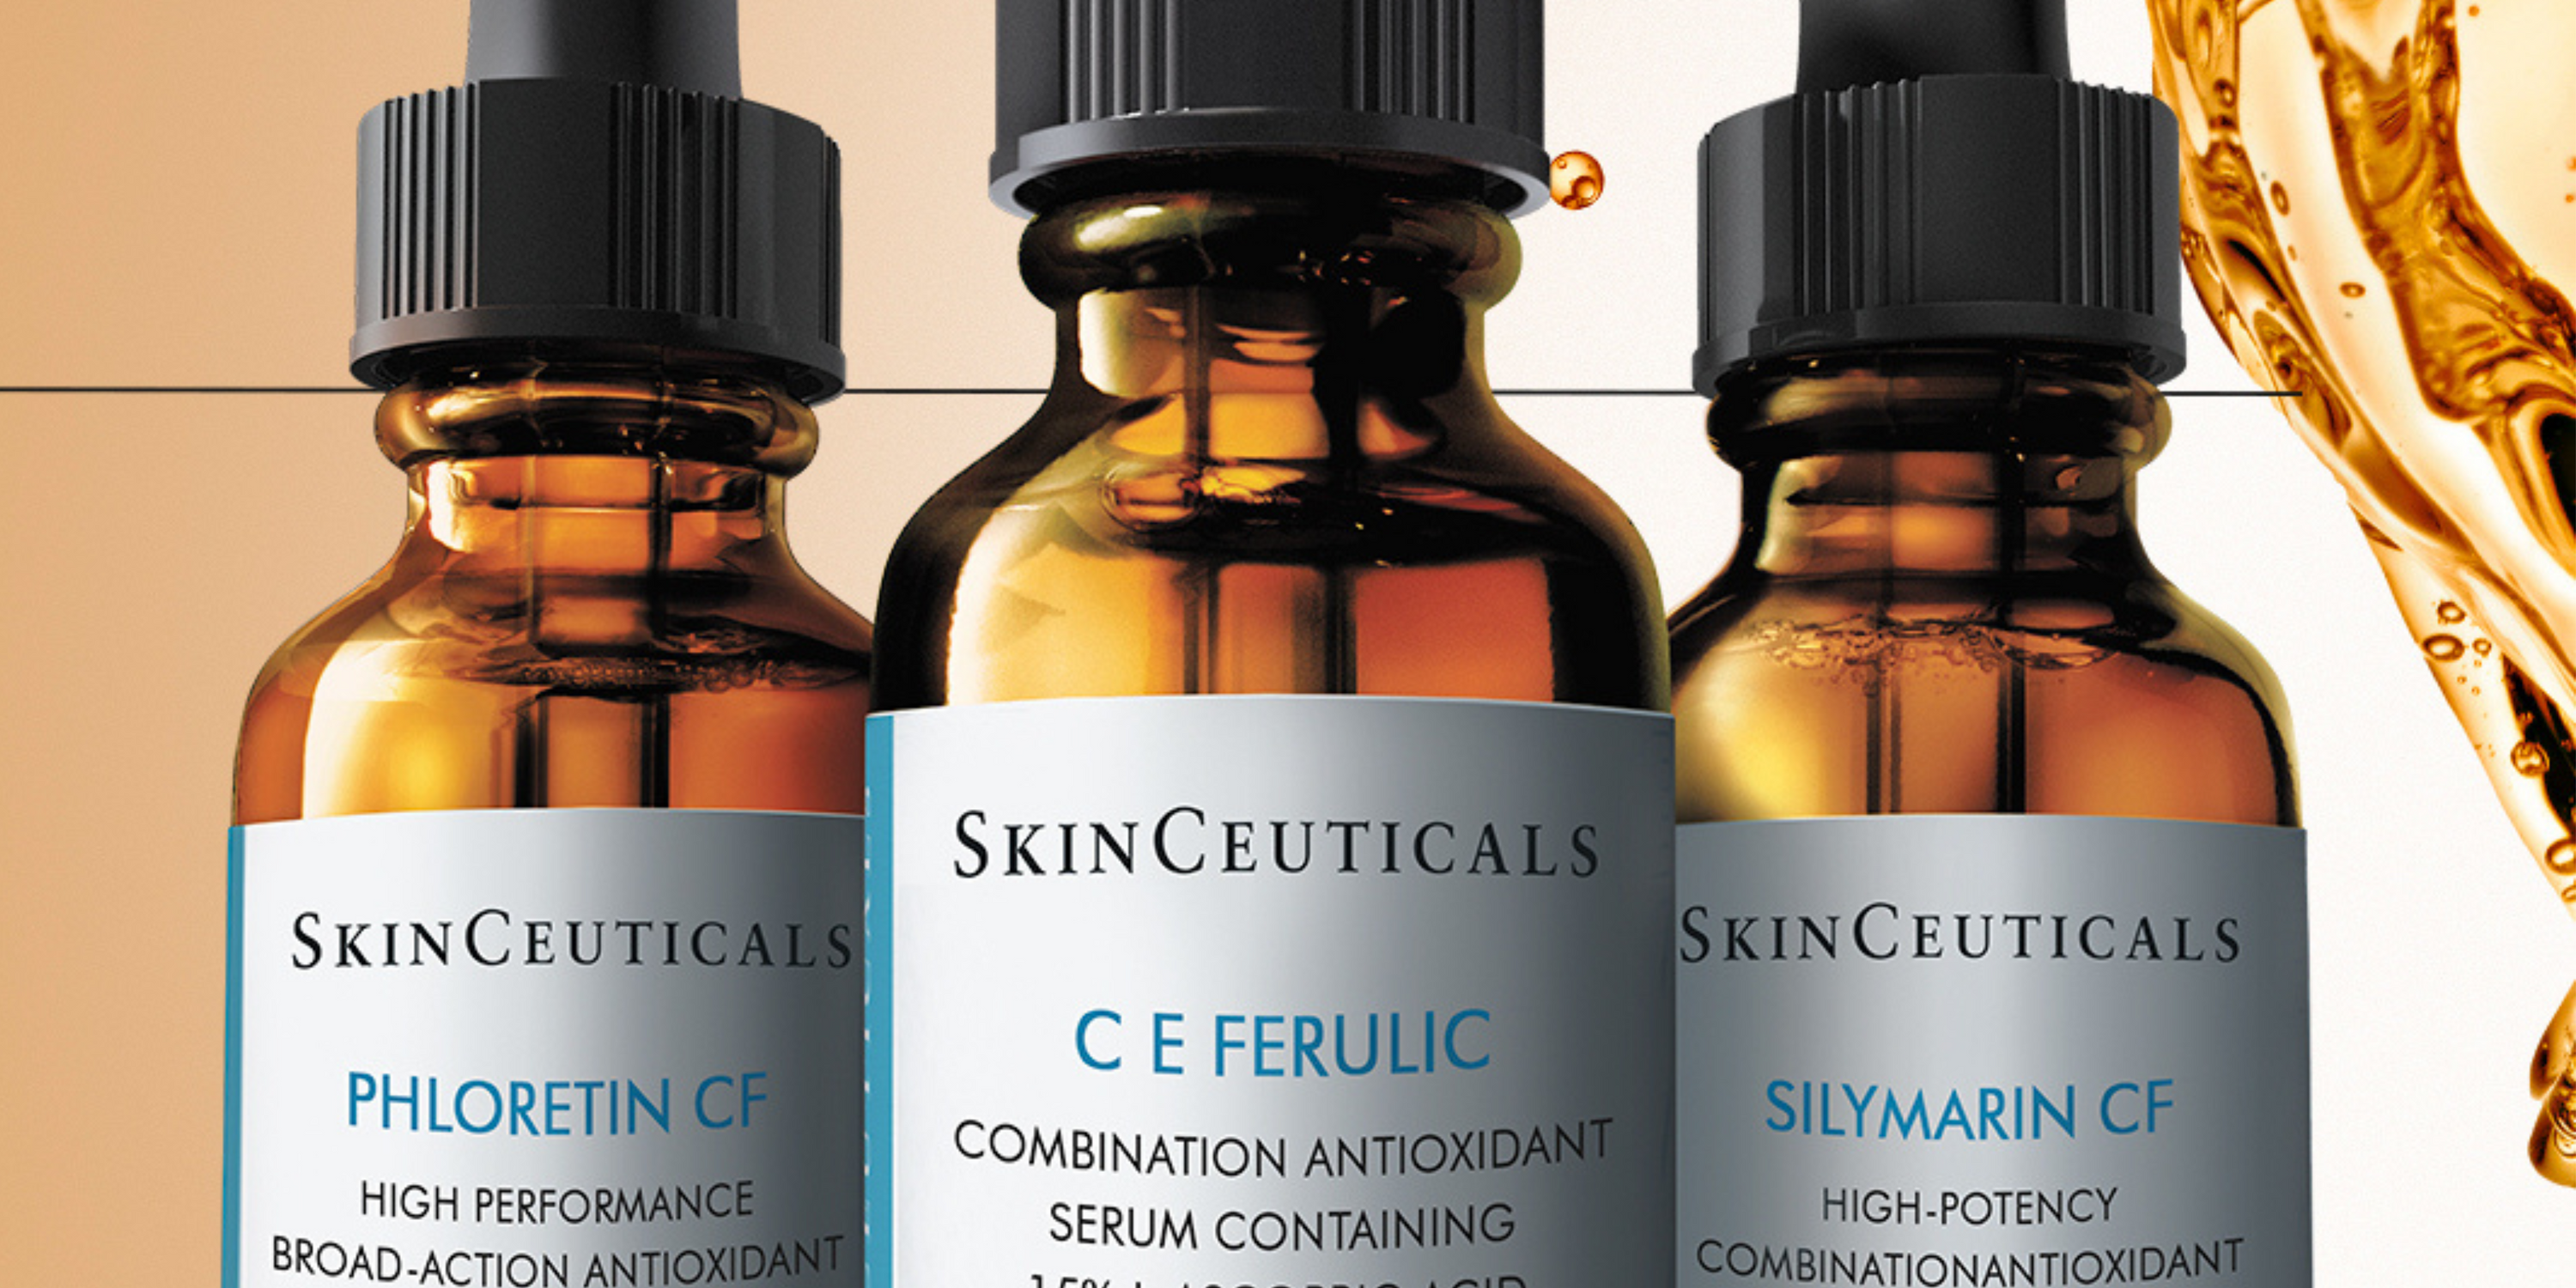 A Comprehensive Skincare Routine Featuring Skinceuticals Products